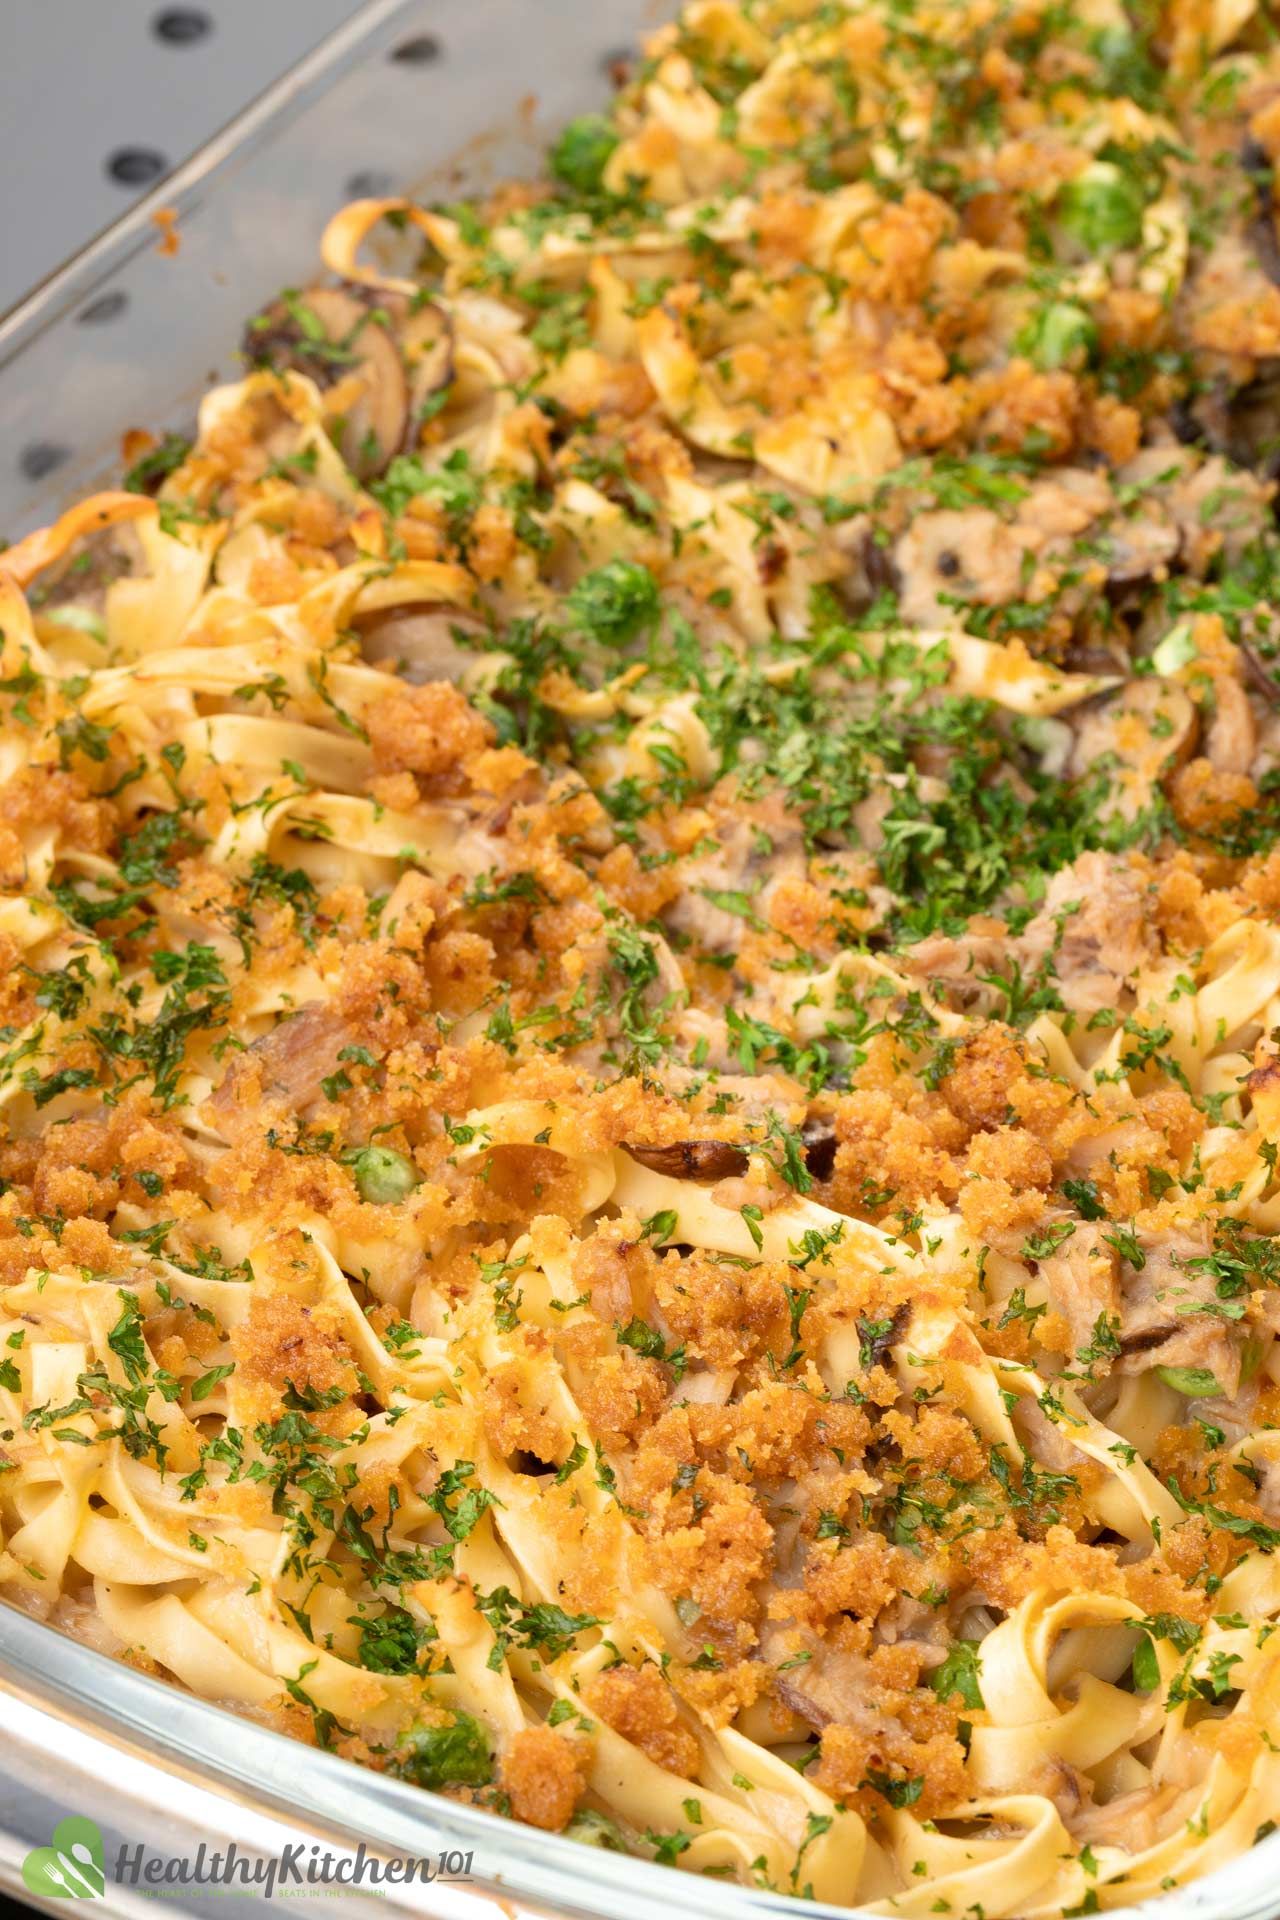 is Classic Tuna Noodle Casserole healthy